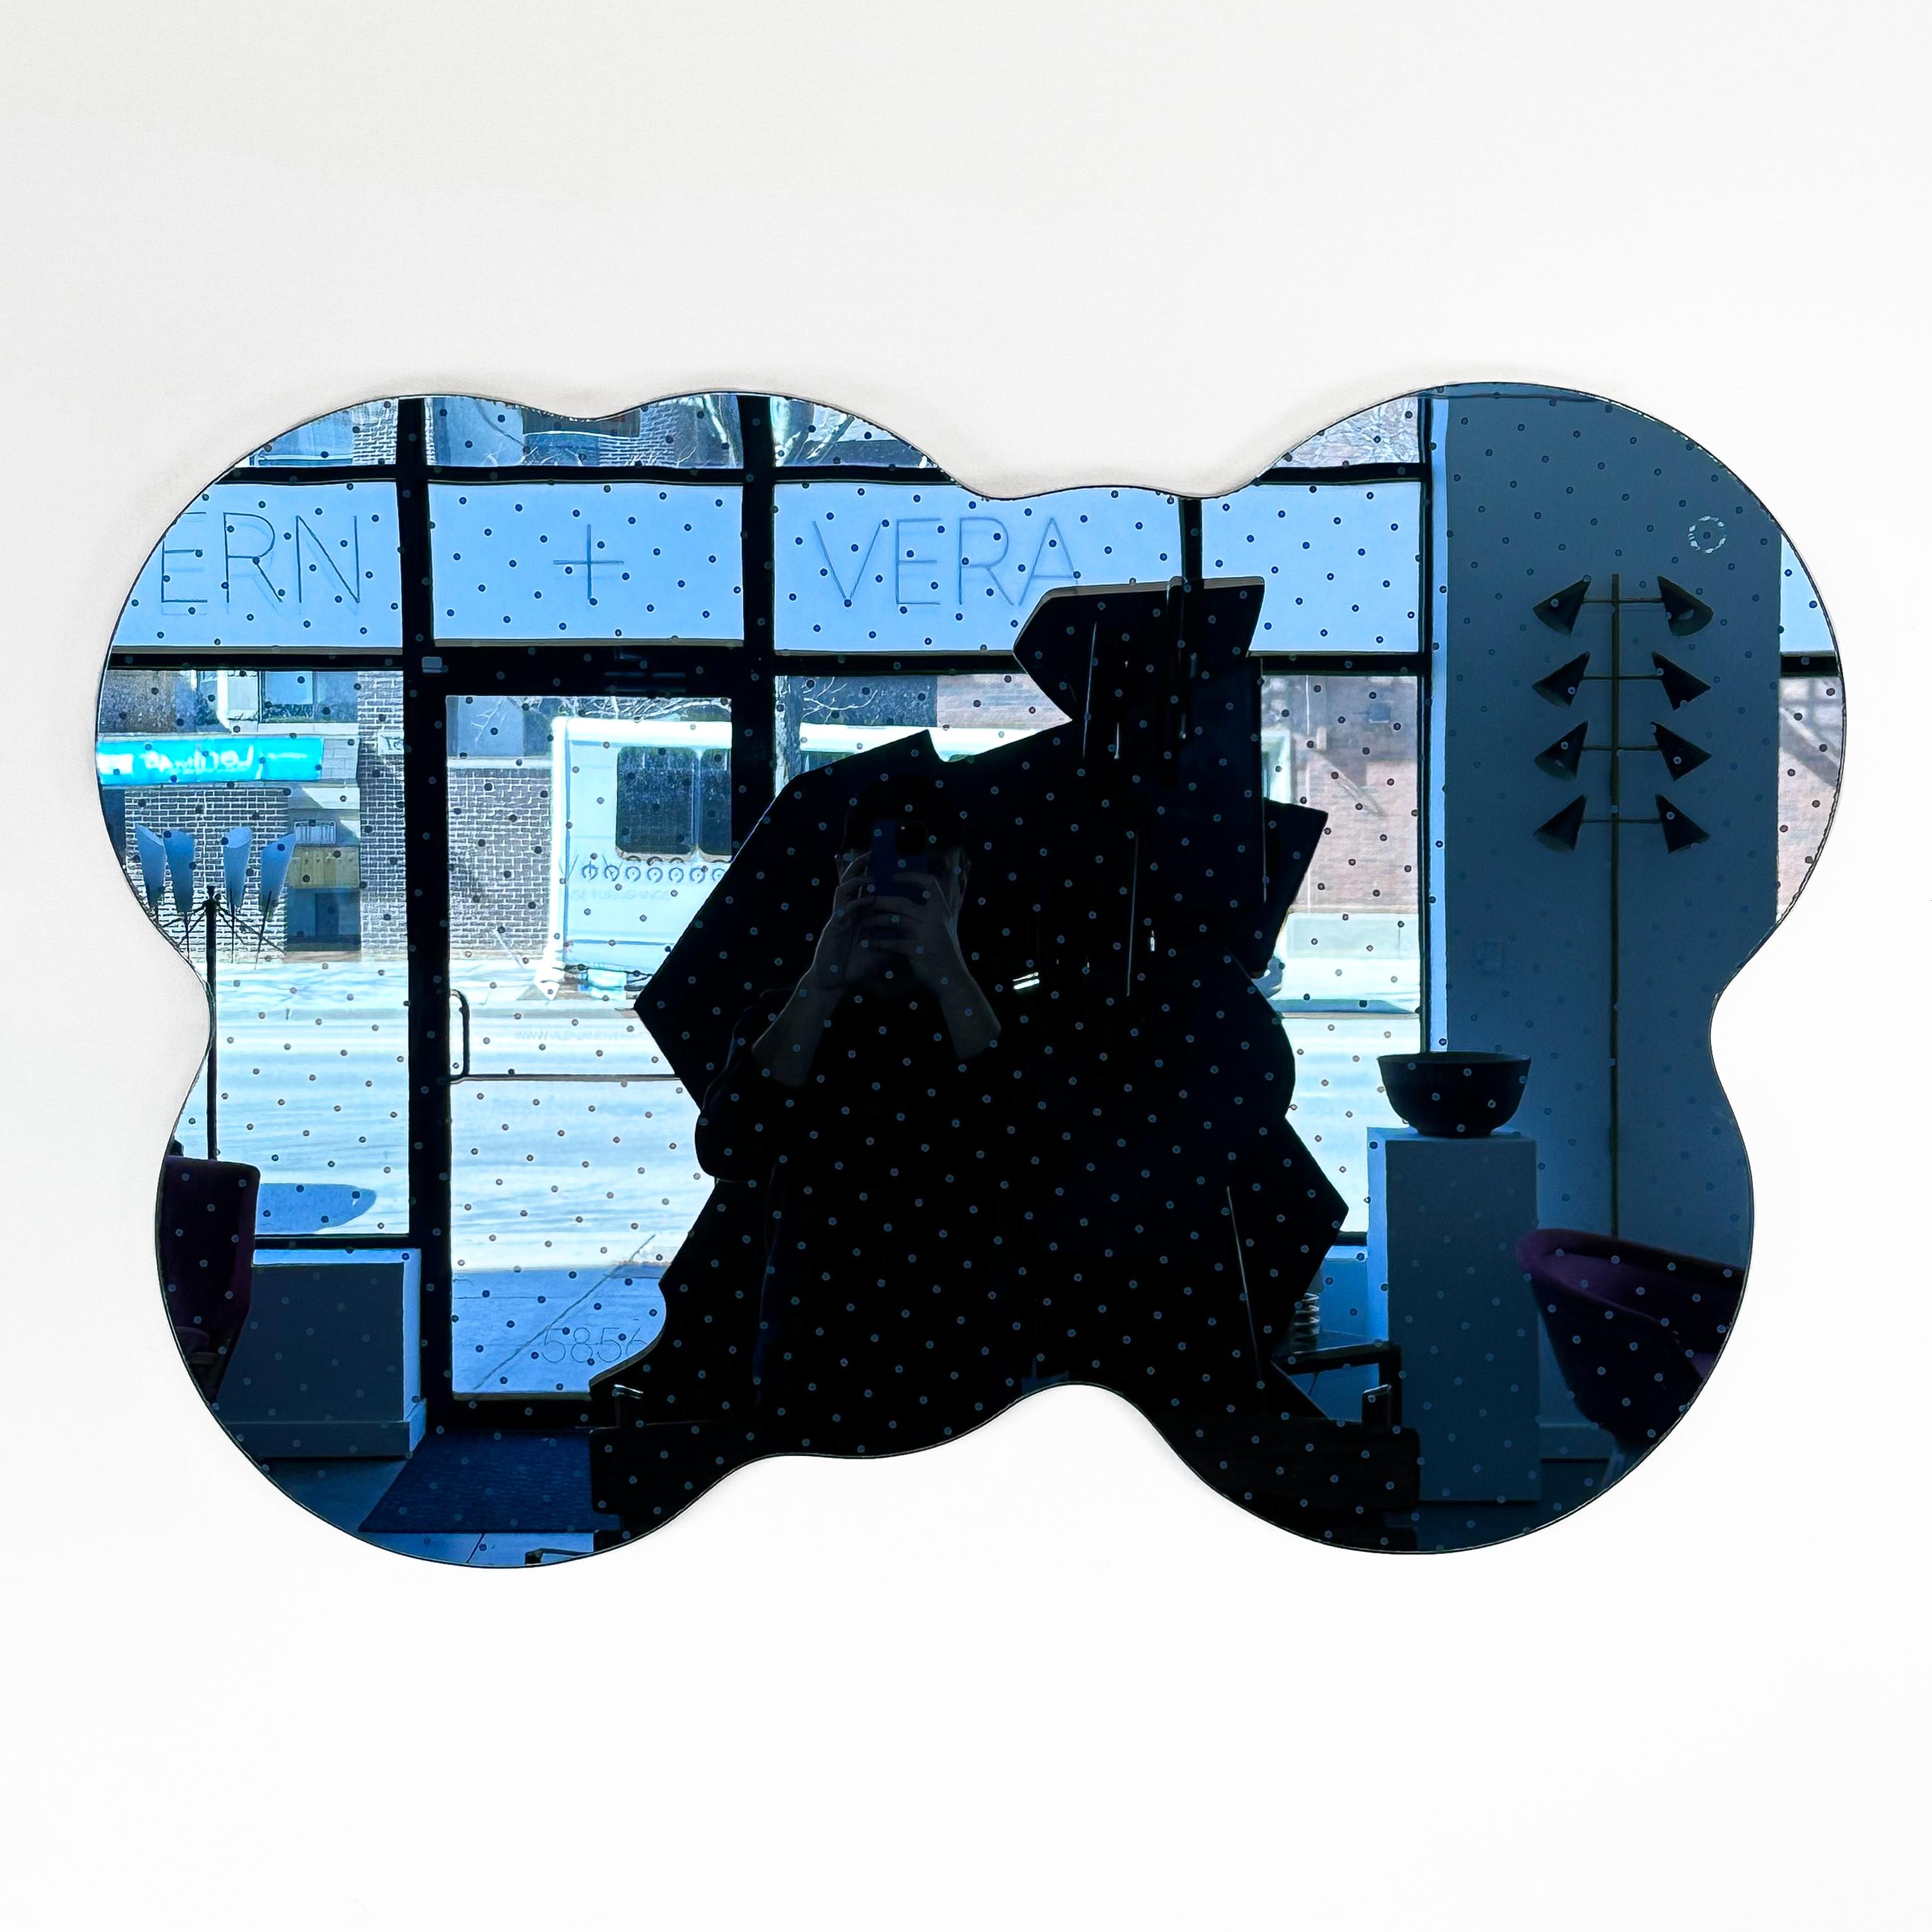 A rare and uncommon Acerbis Morphos blue cloud wall mirror, Italy circa 1980s. This unique modern mirror features an asymmetrical curvaceous cloud shape with an etched diagonal grid of small polka dots as a decorative pattern. Mirrored in a